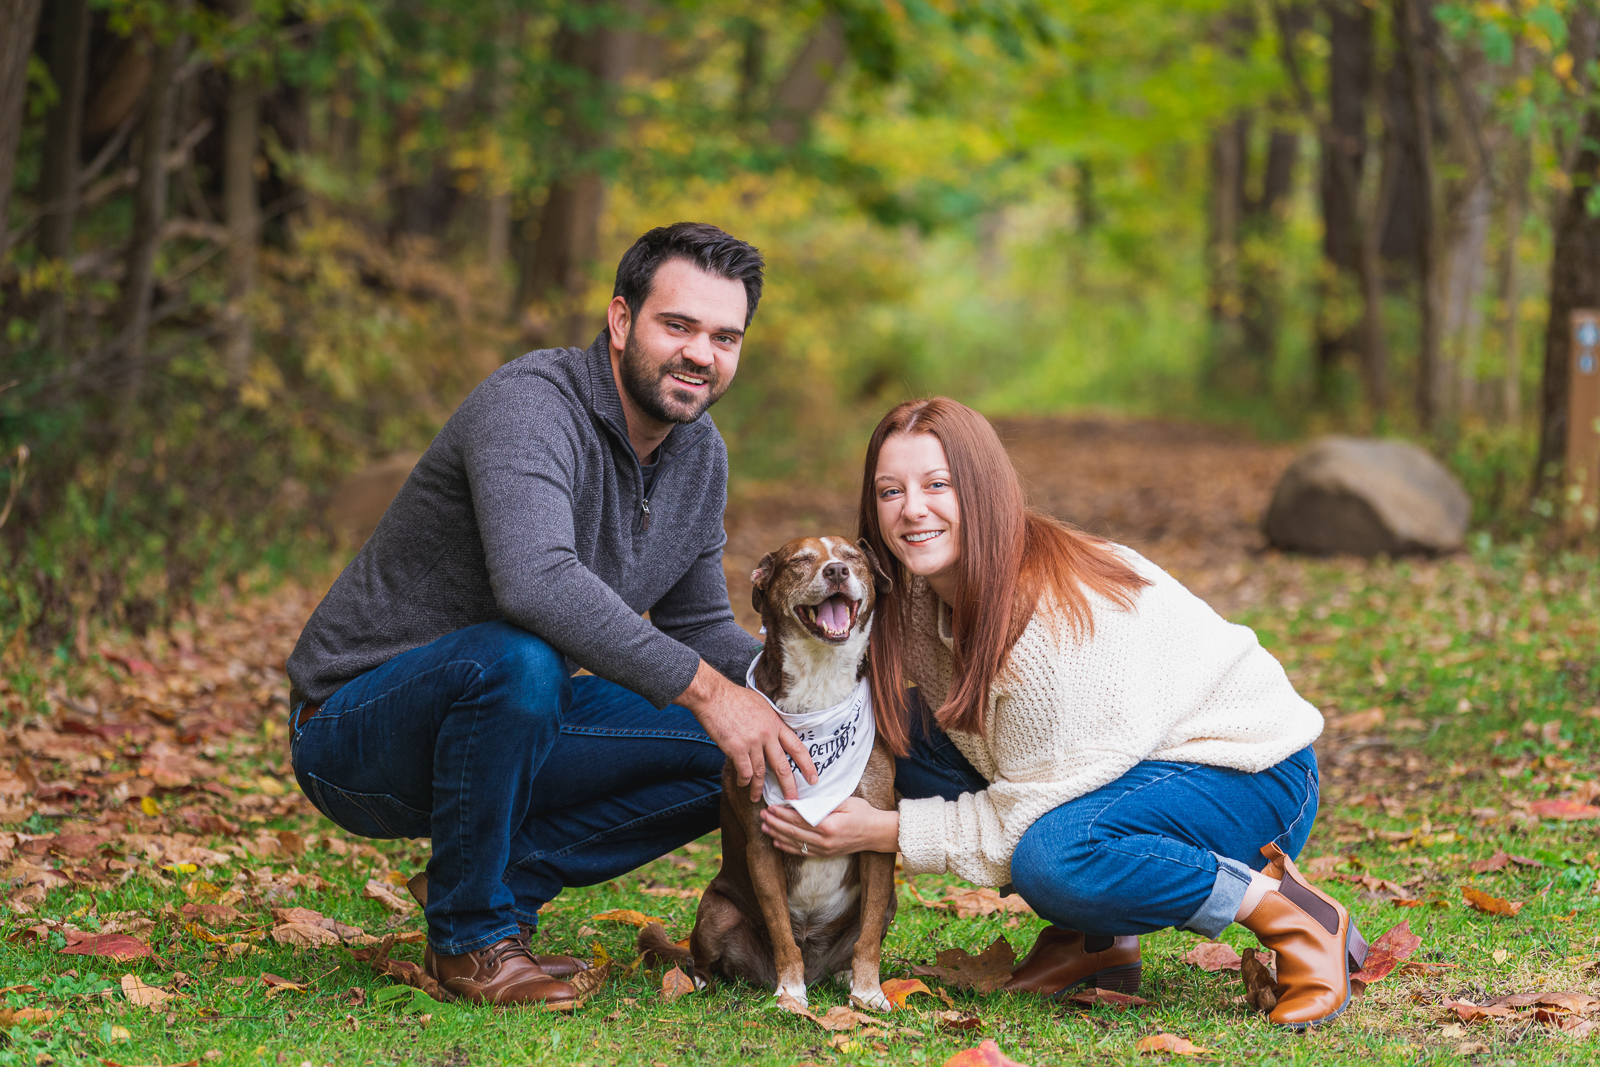 Man and woman fiancee engagement photo with dog, smile, cute dog, dog bandana, outdoor, nature, forest, fall leaves, fall colors, outdoor fall engagement photo session at Tinkers Creek, Bedford Reservation, Cleveland Metroparks